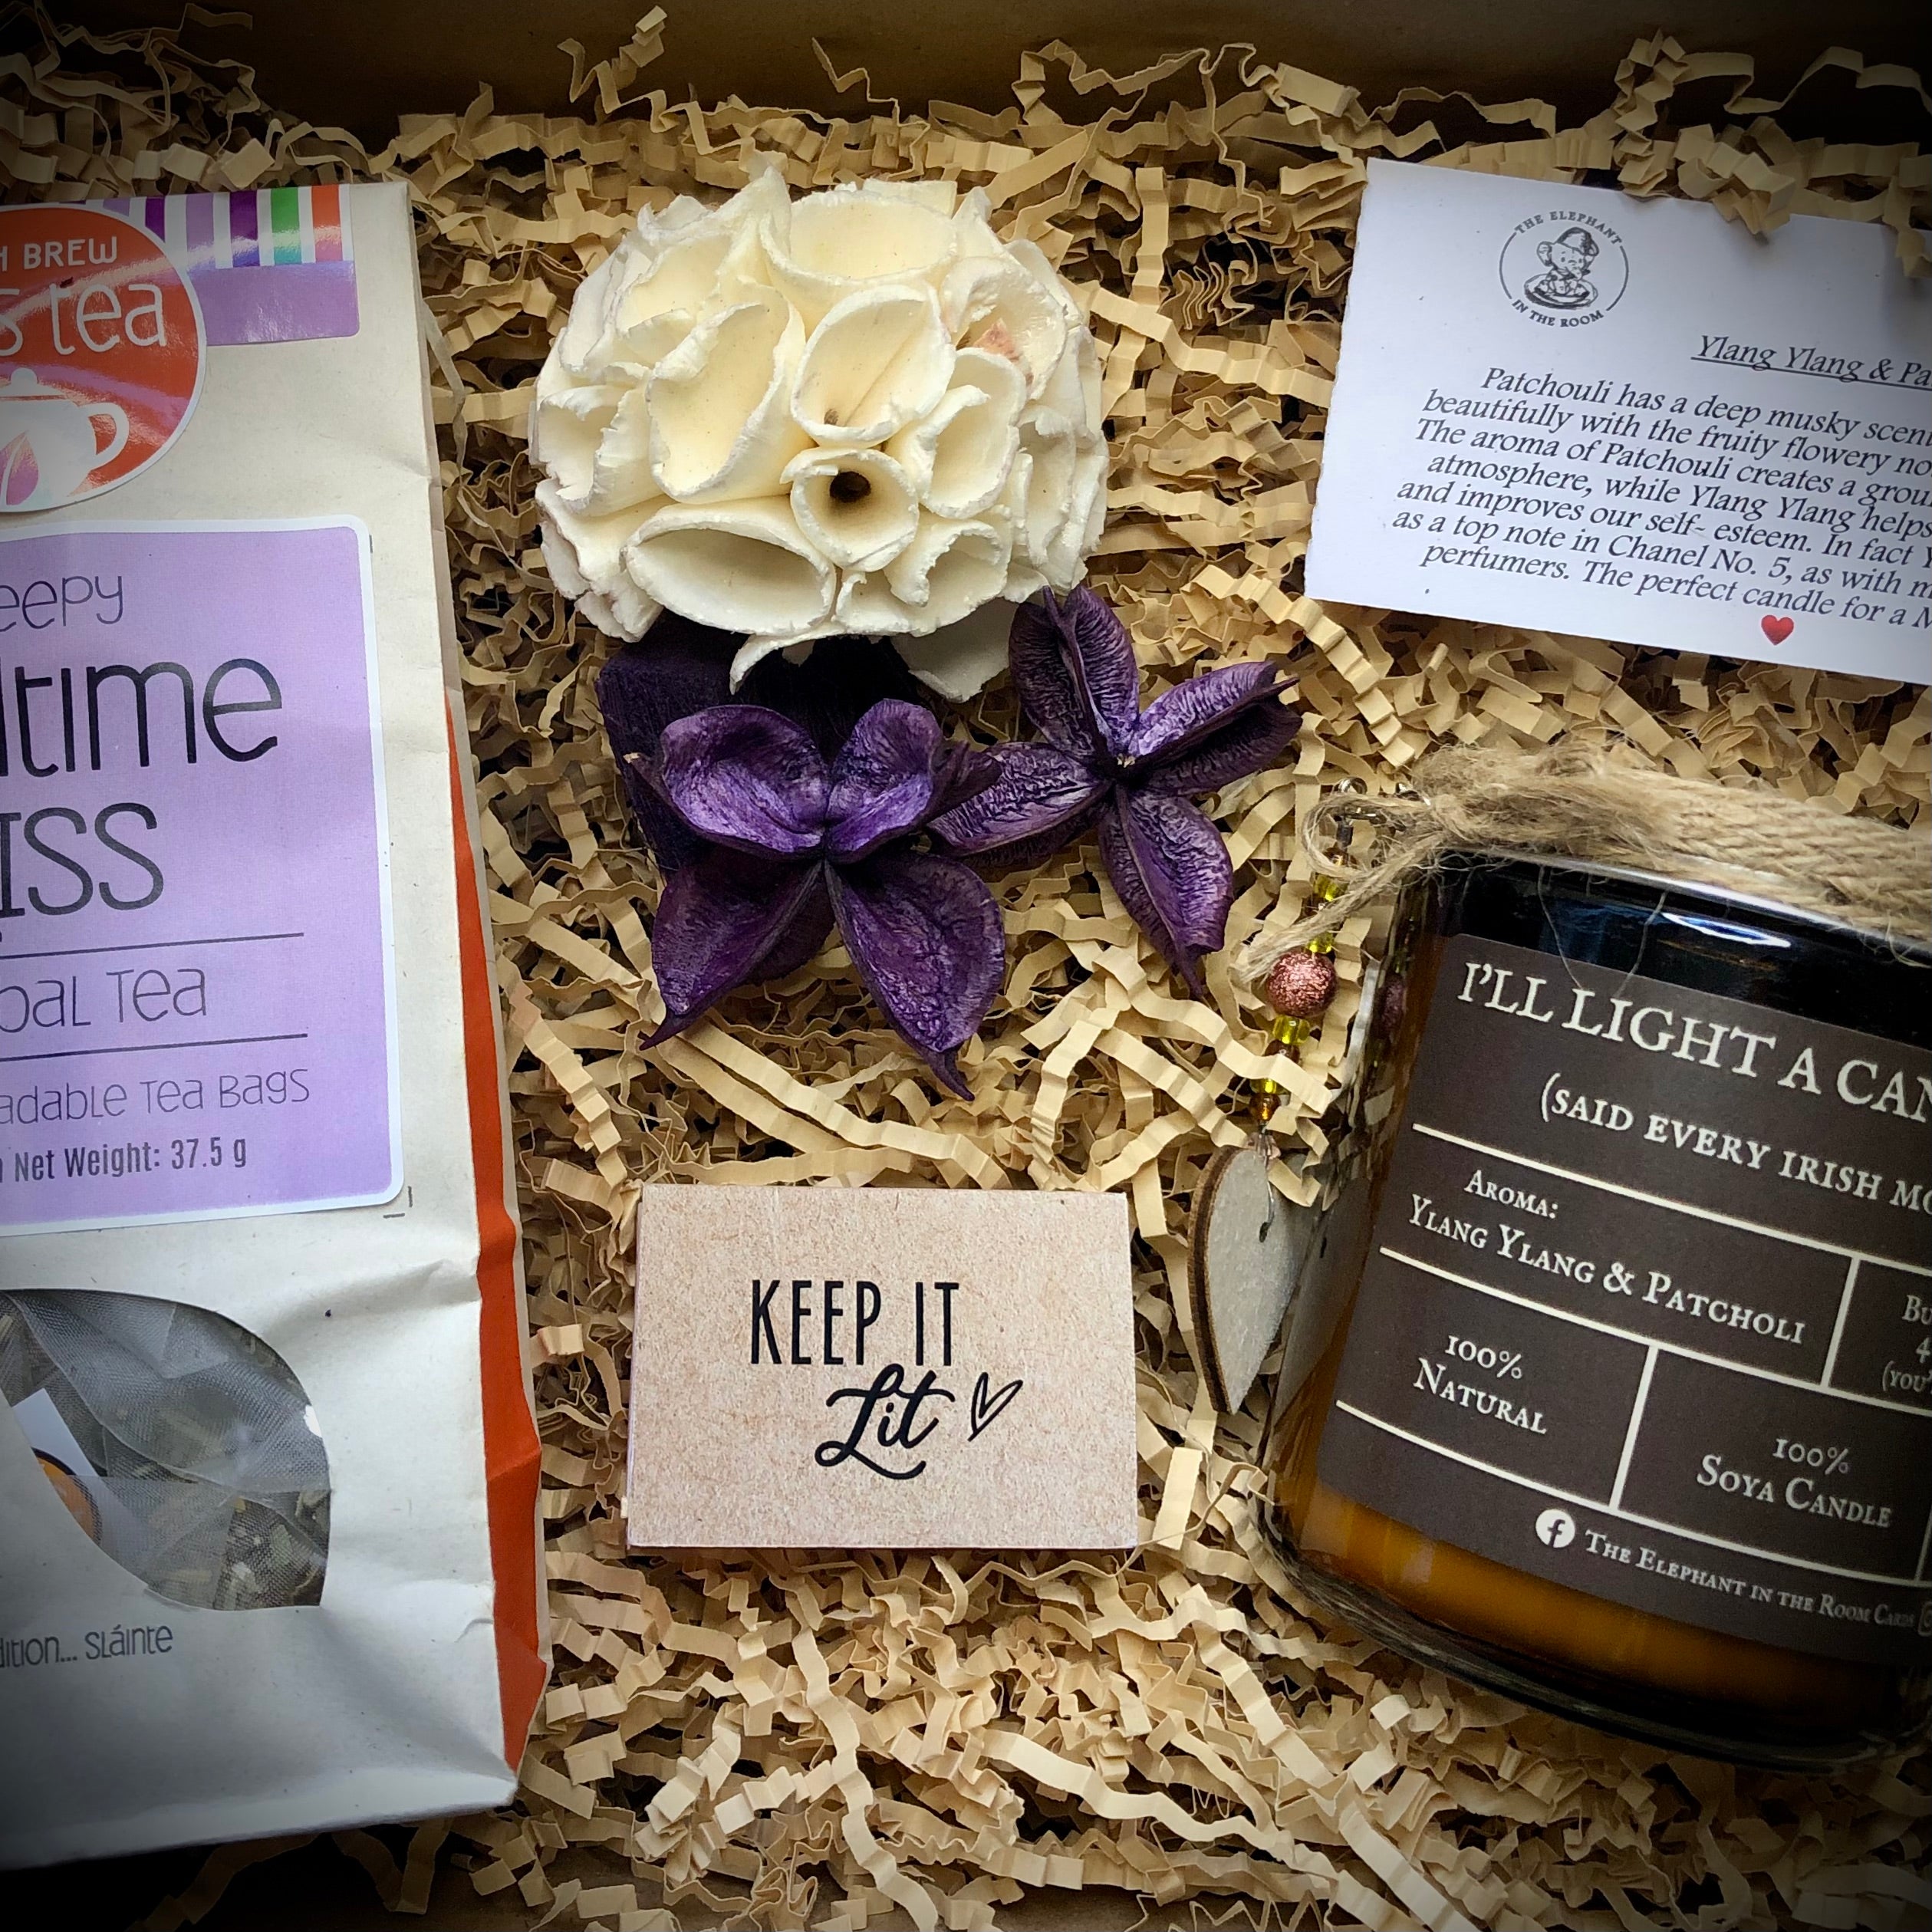 Cancer Candle and wellness tea care package